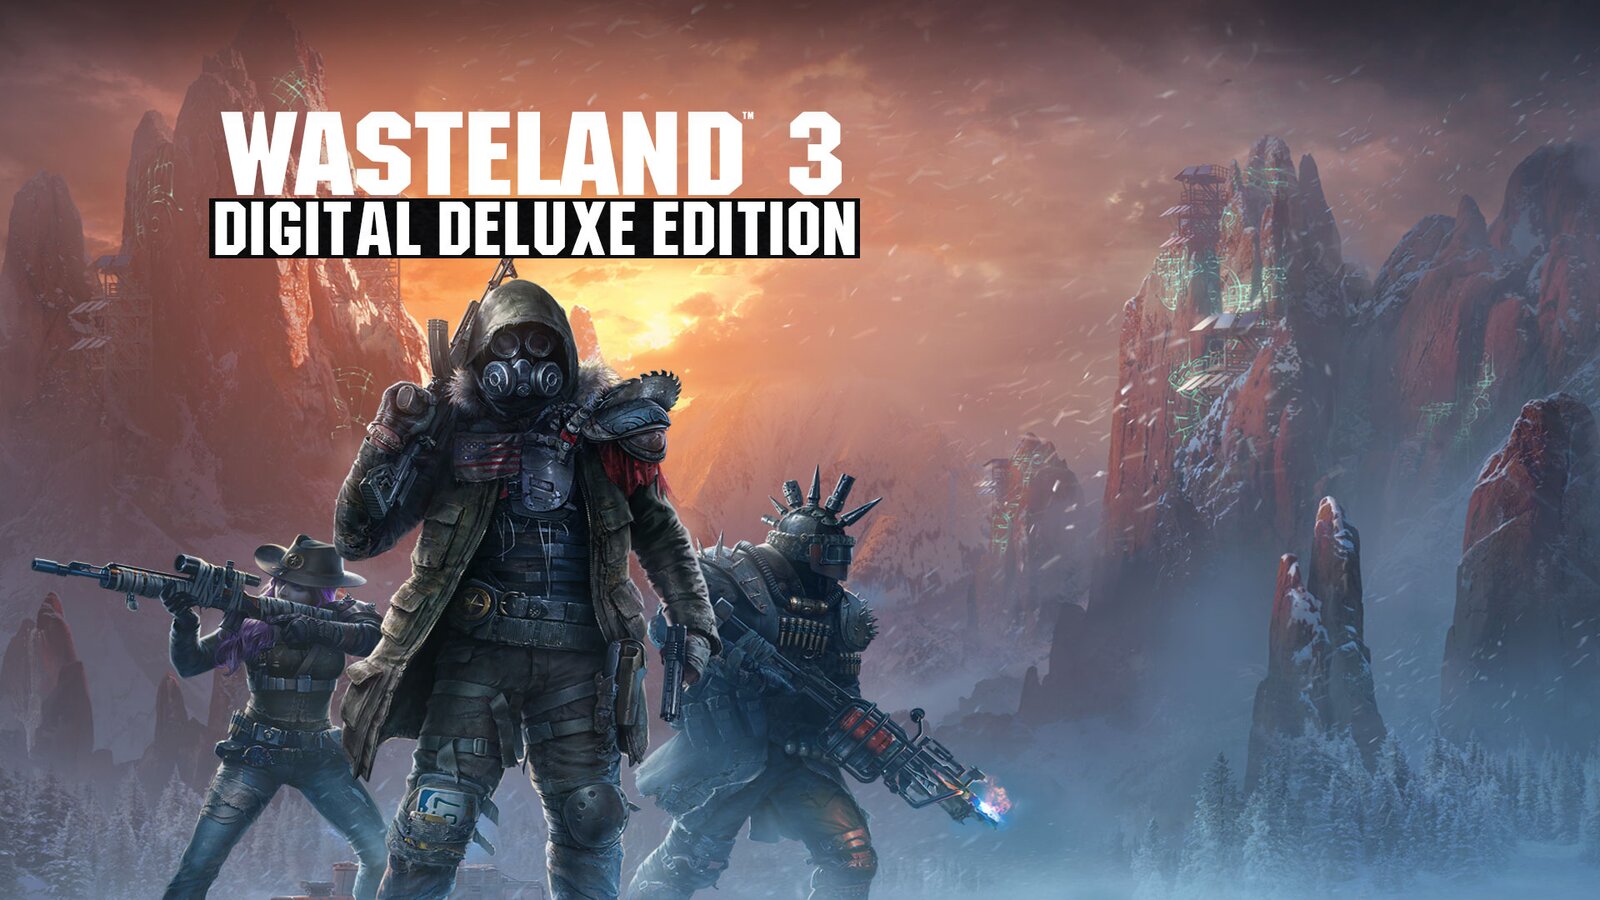 Wasteland 3 - Digital Deluxe Edition